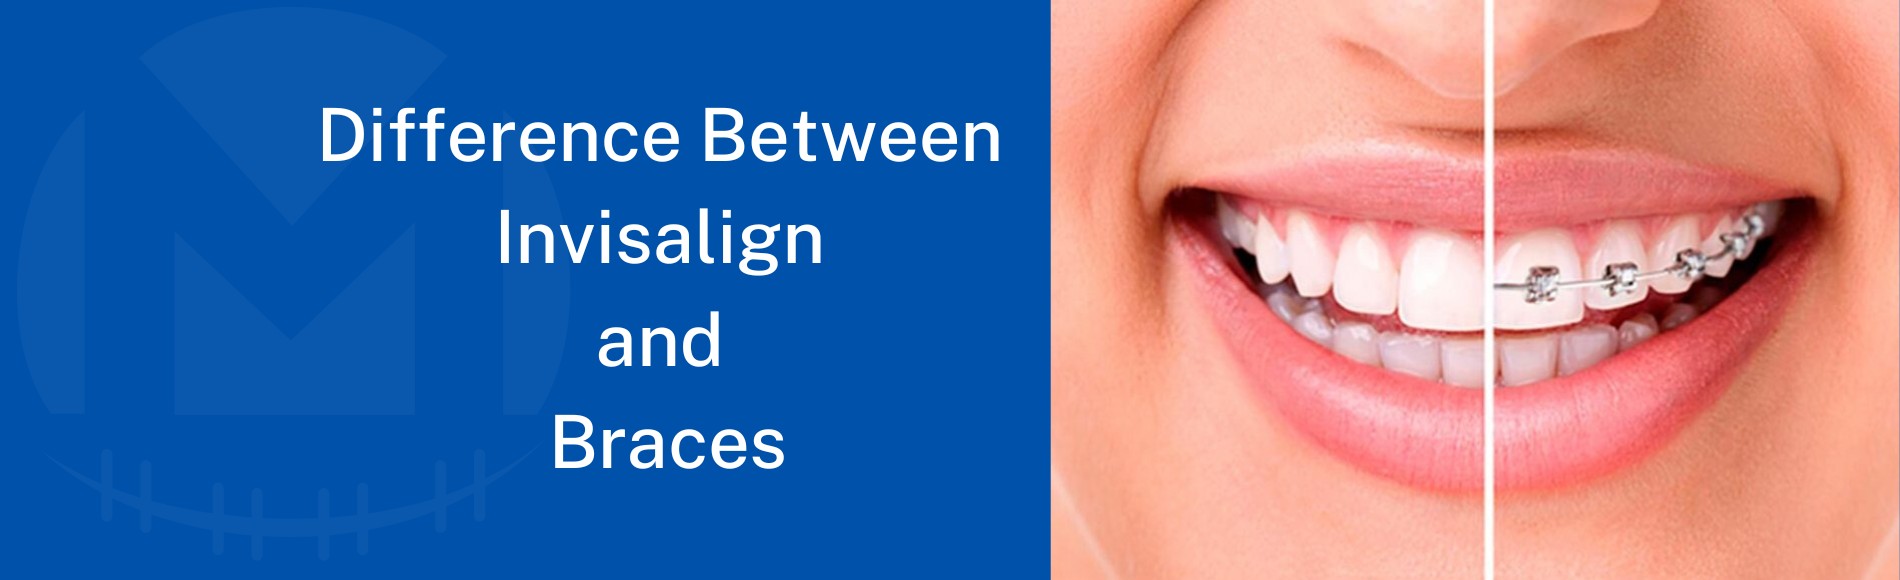 Difference Between Invisalign and Braces